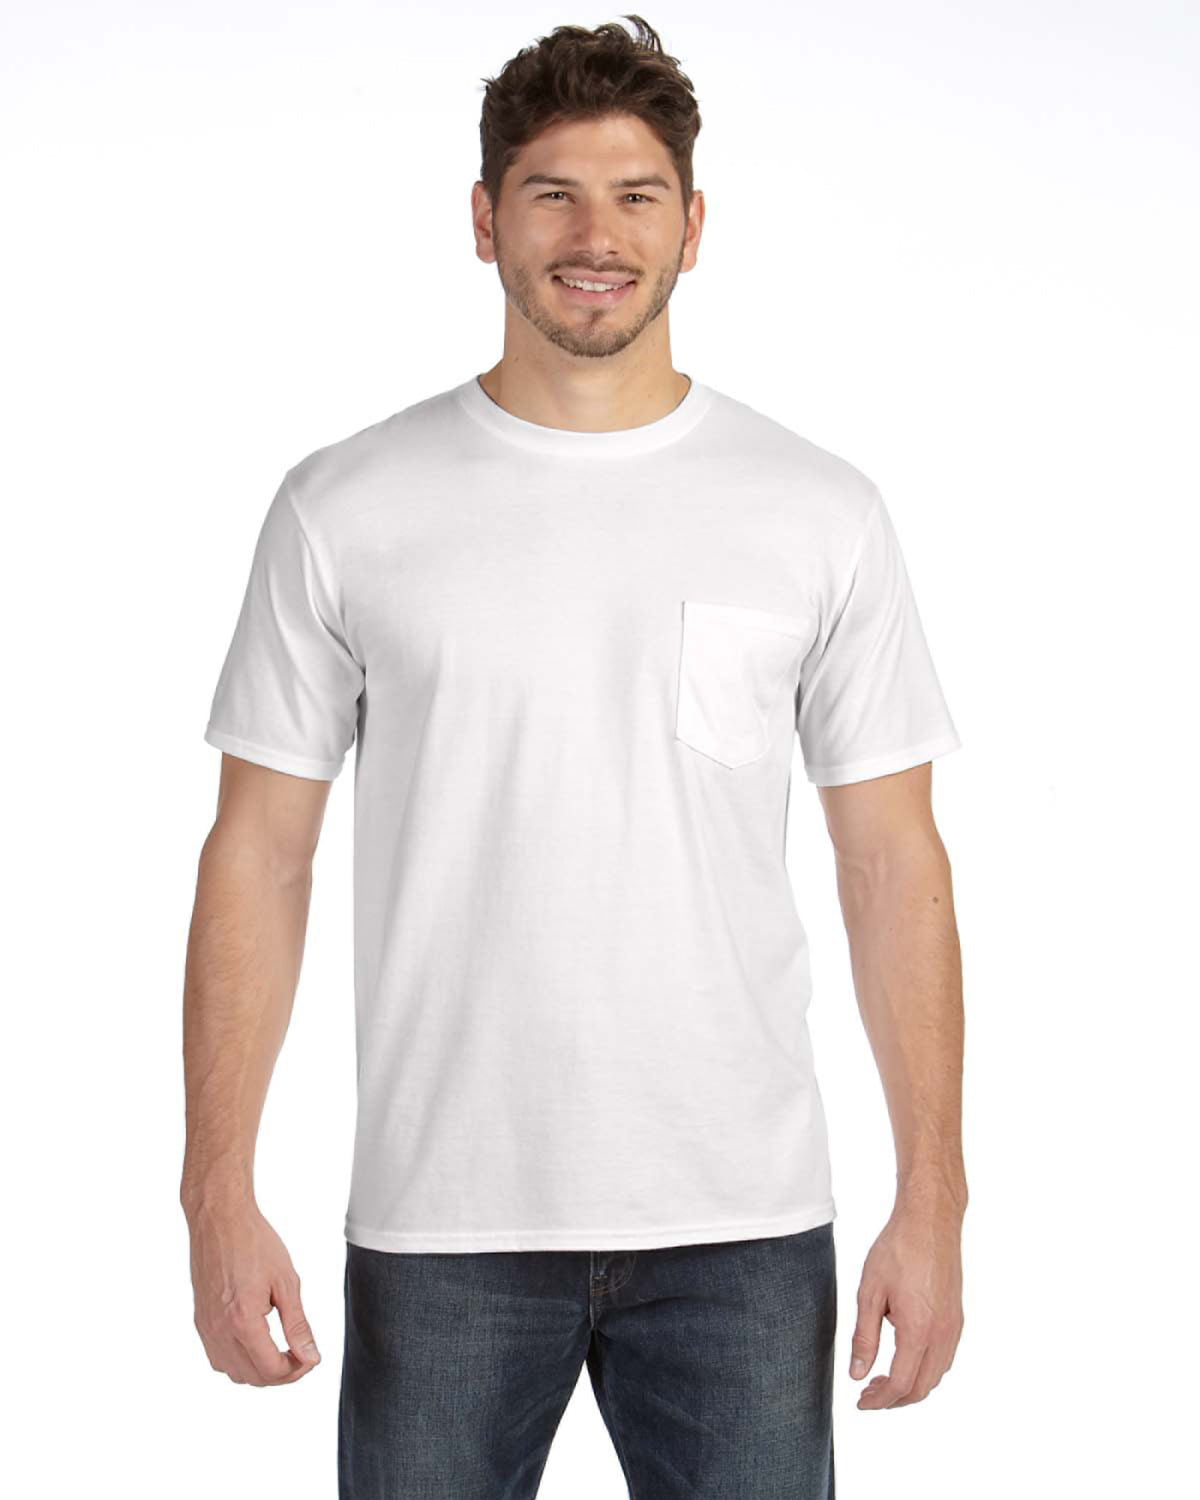 Anvil - The Anvil Adult Midweight Pocket T-Shirt - WHITE - M - Walmart ...